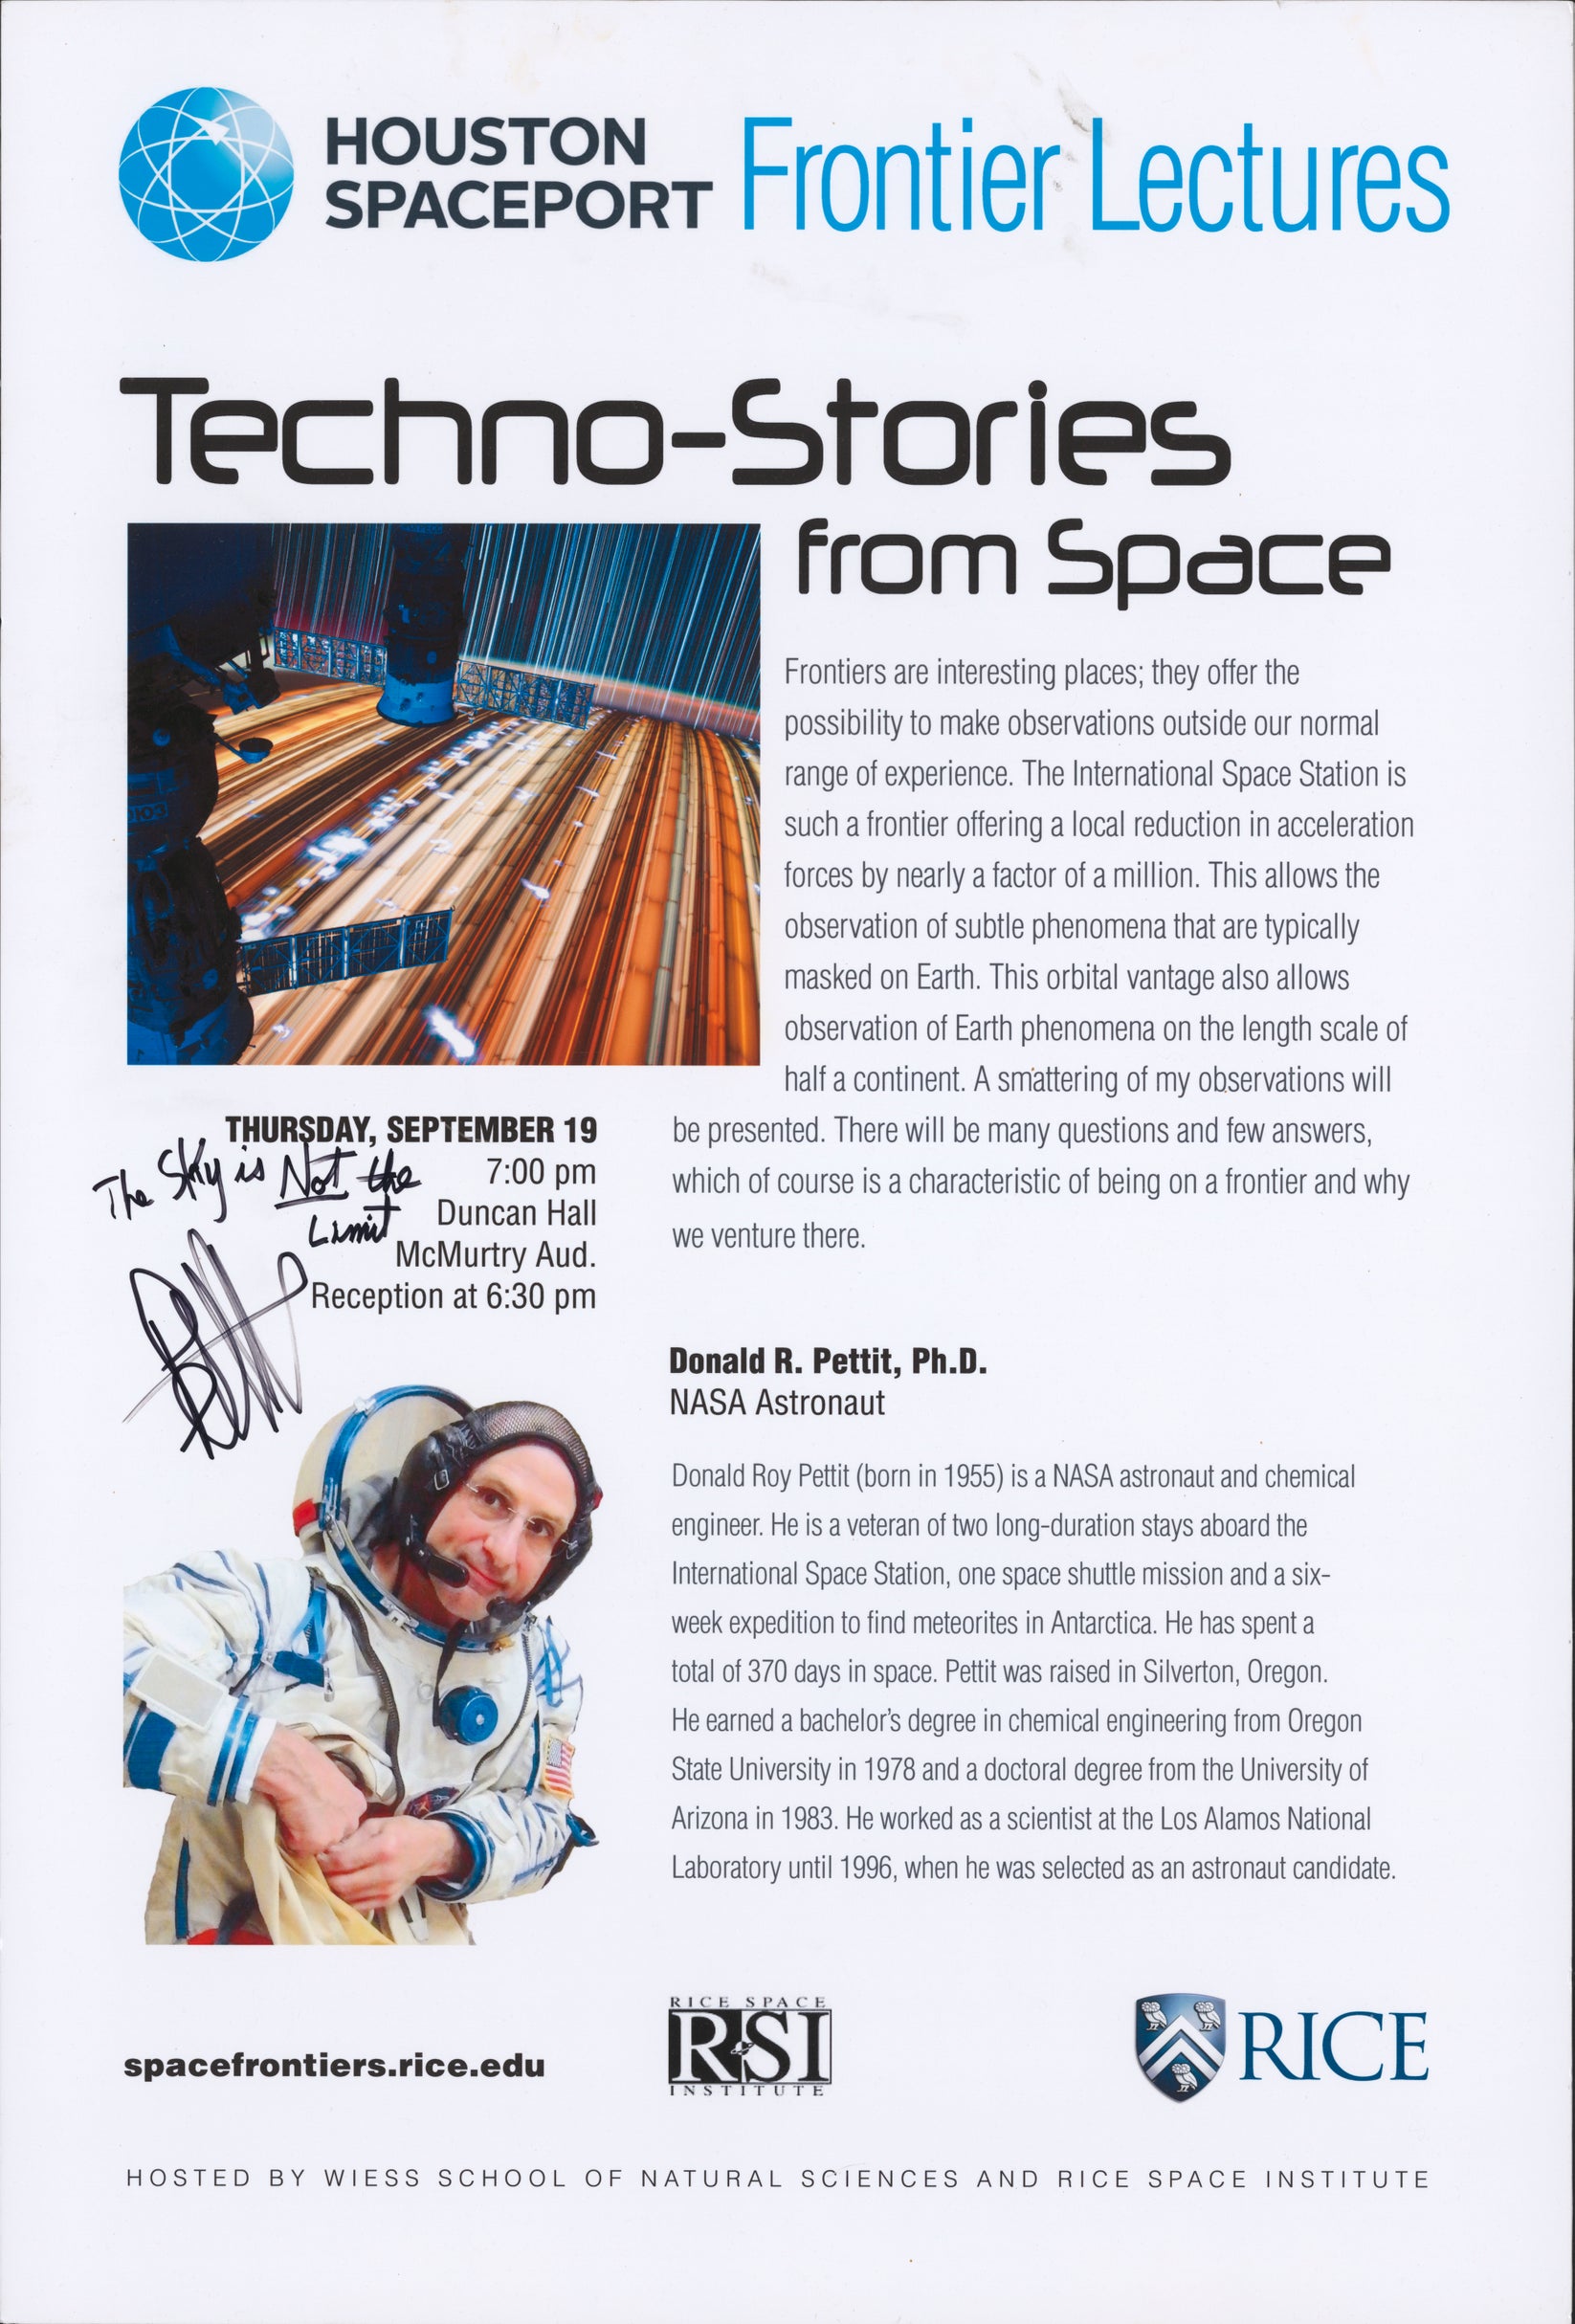 Poster of "Techno-Stories from Space" by Donald R. Pettit